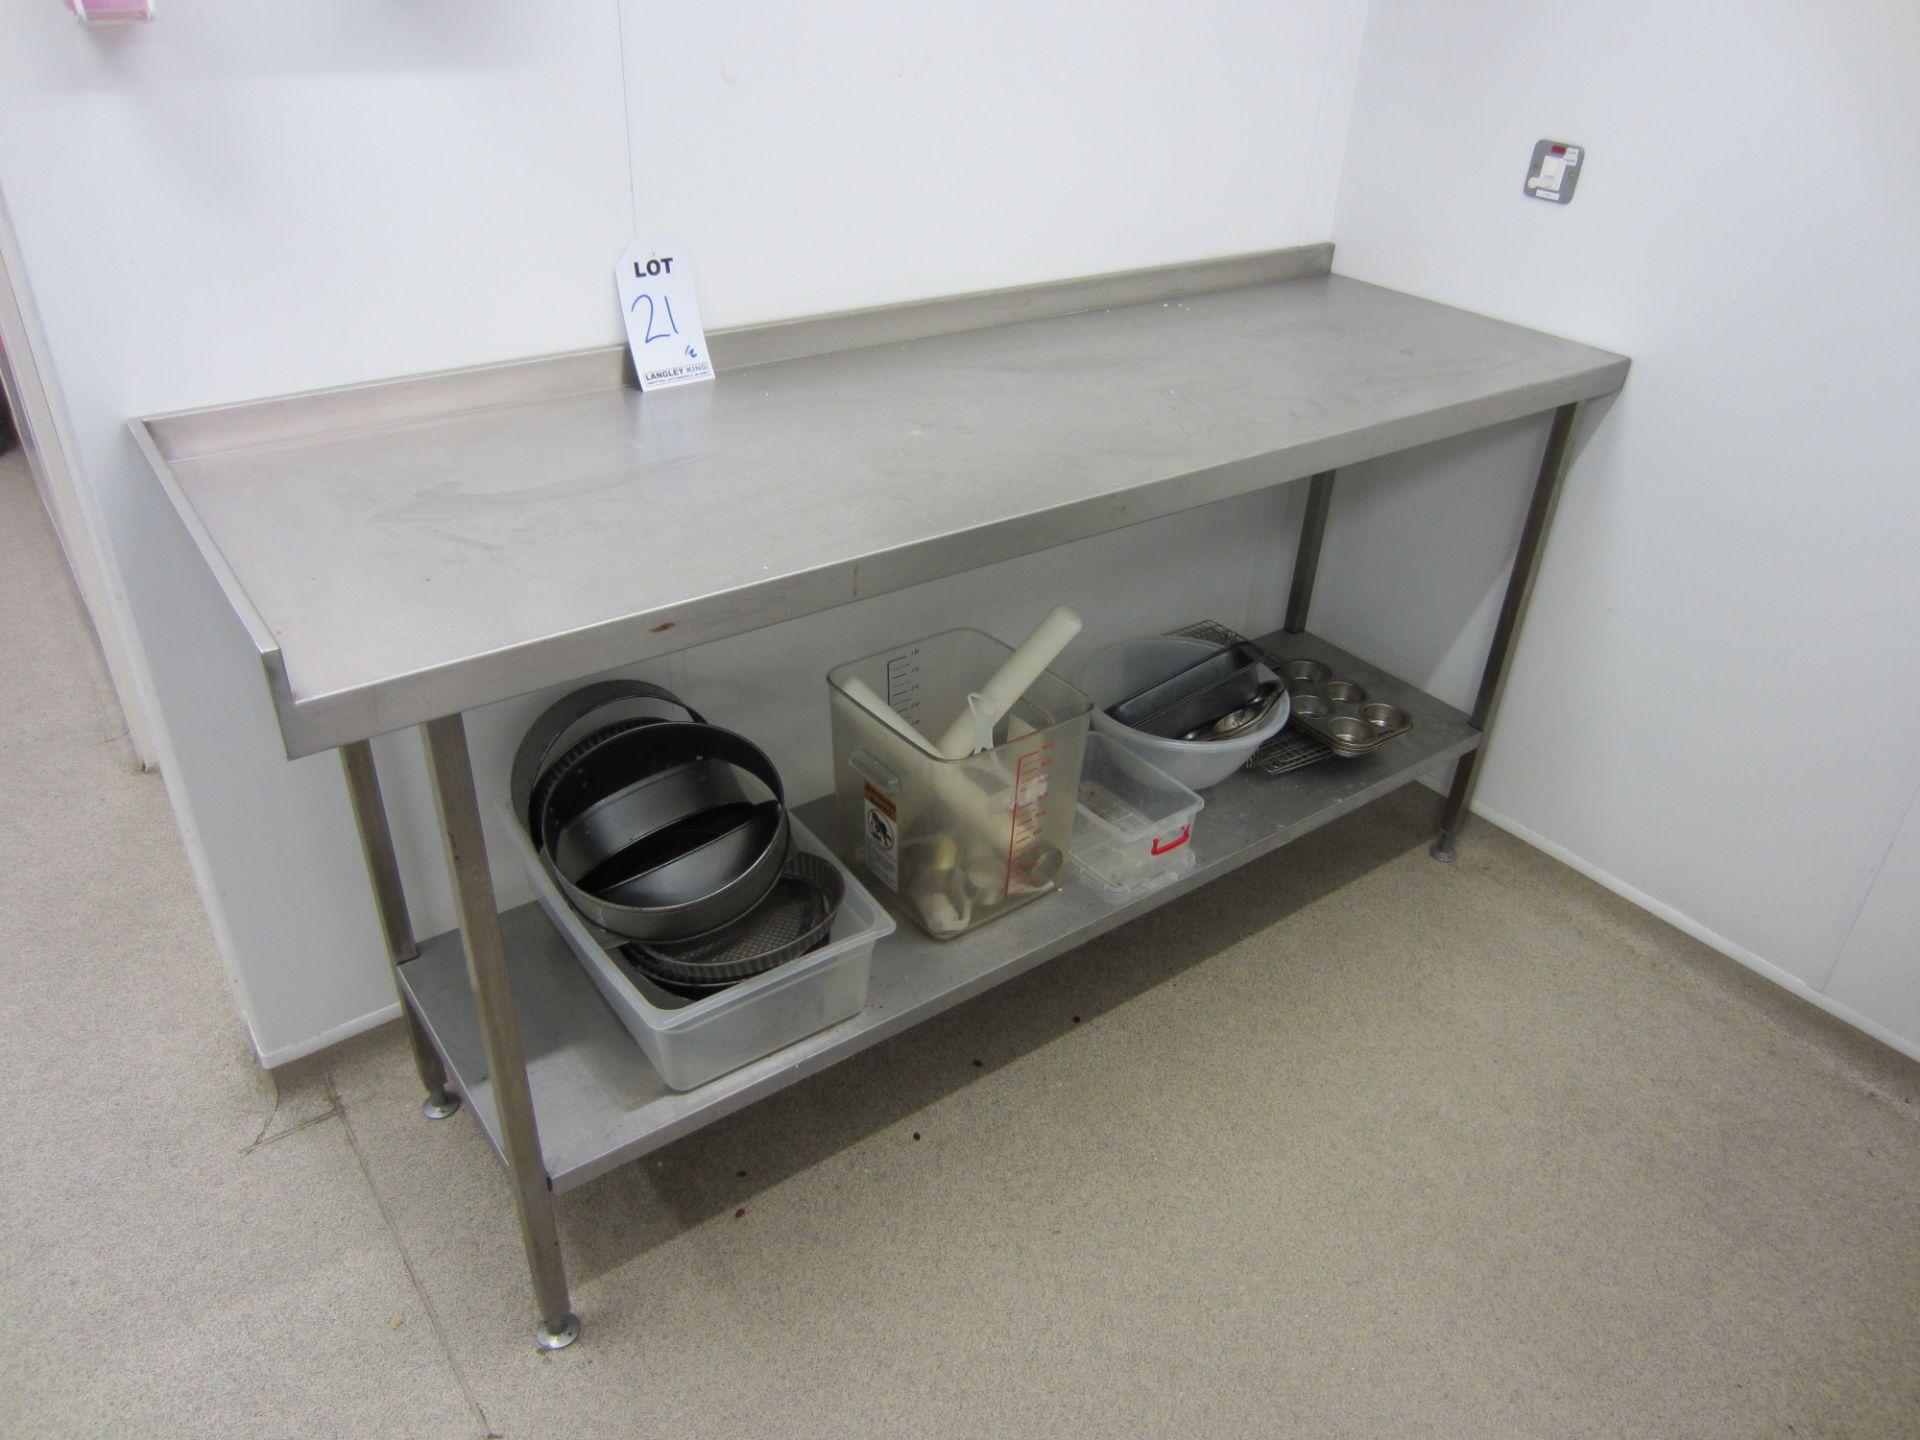 Two Stainless Steel Prep Tables With Upstand At Rear, One Left & Right As Pictured